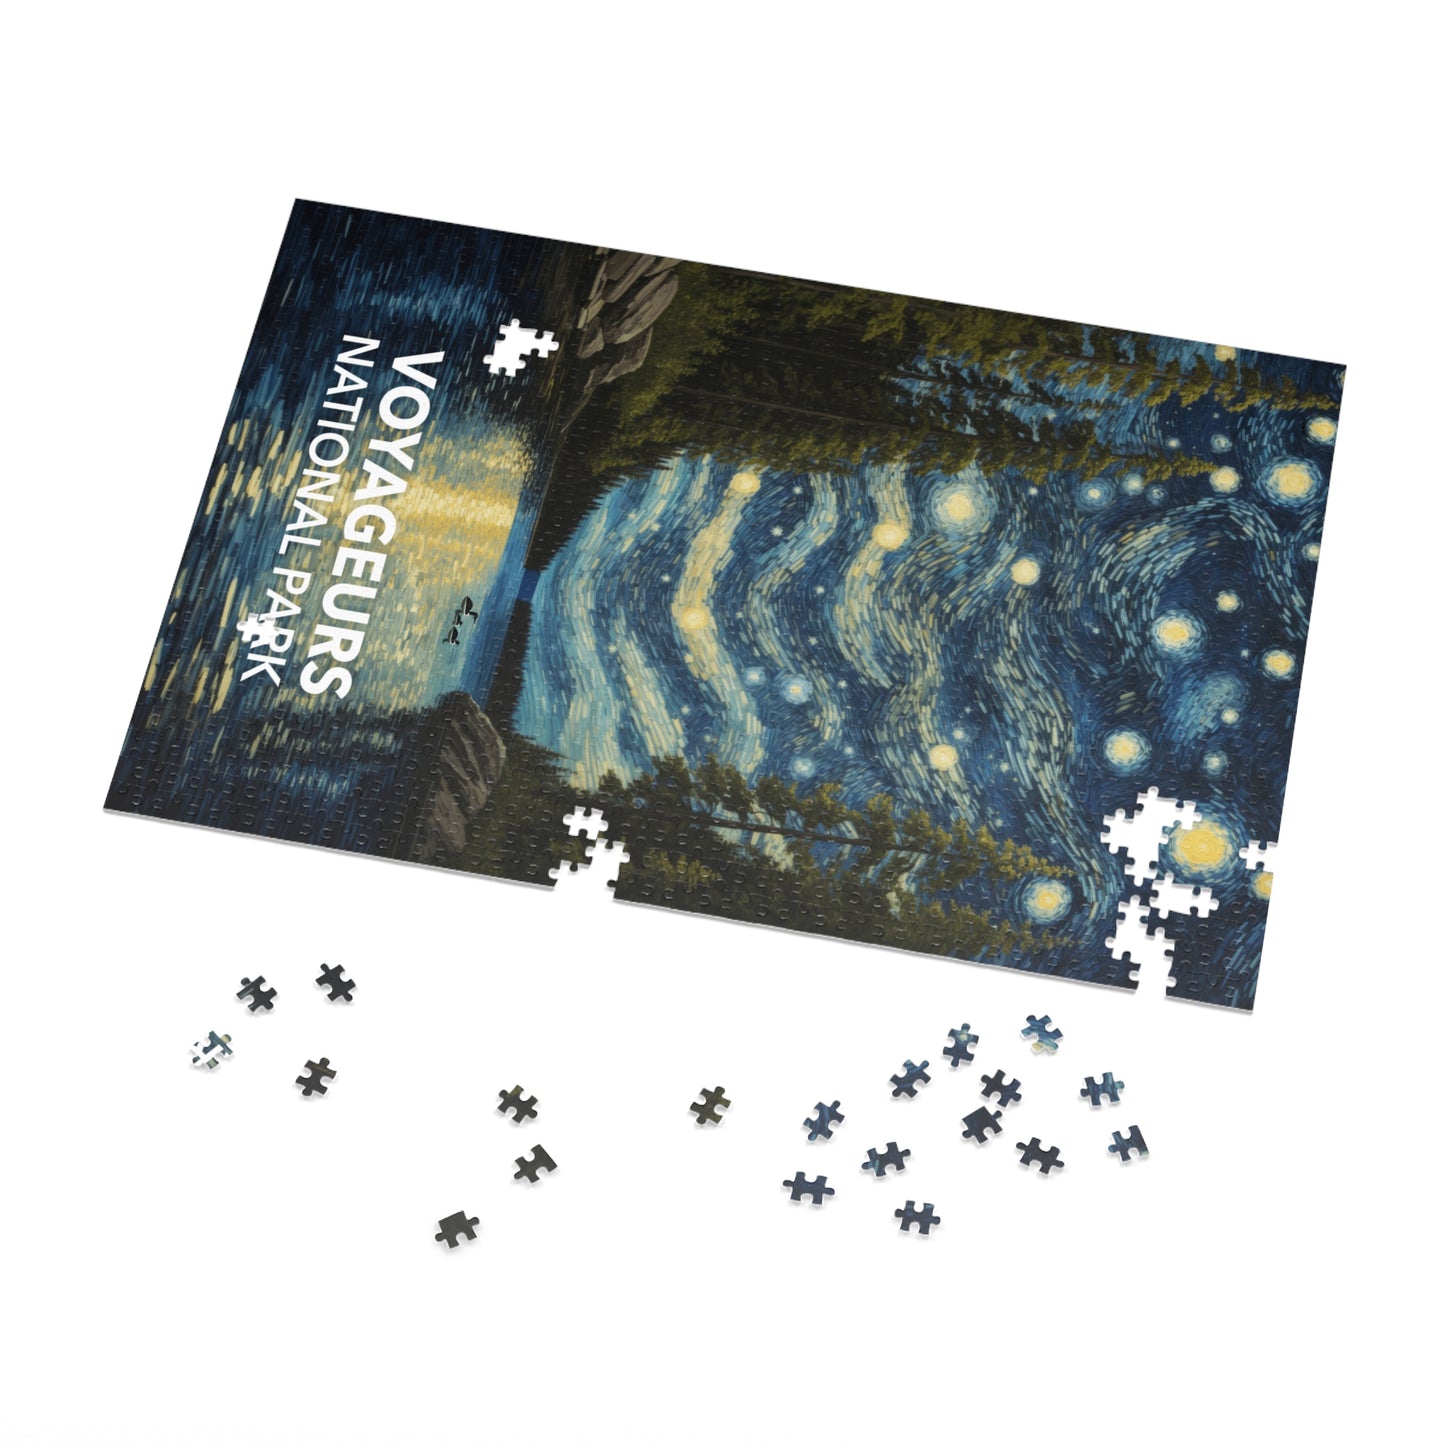 Voyageurs National Park Jigsaw Puzzle - The Starry Night